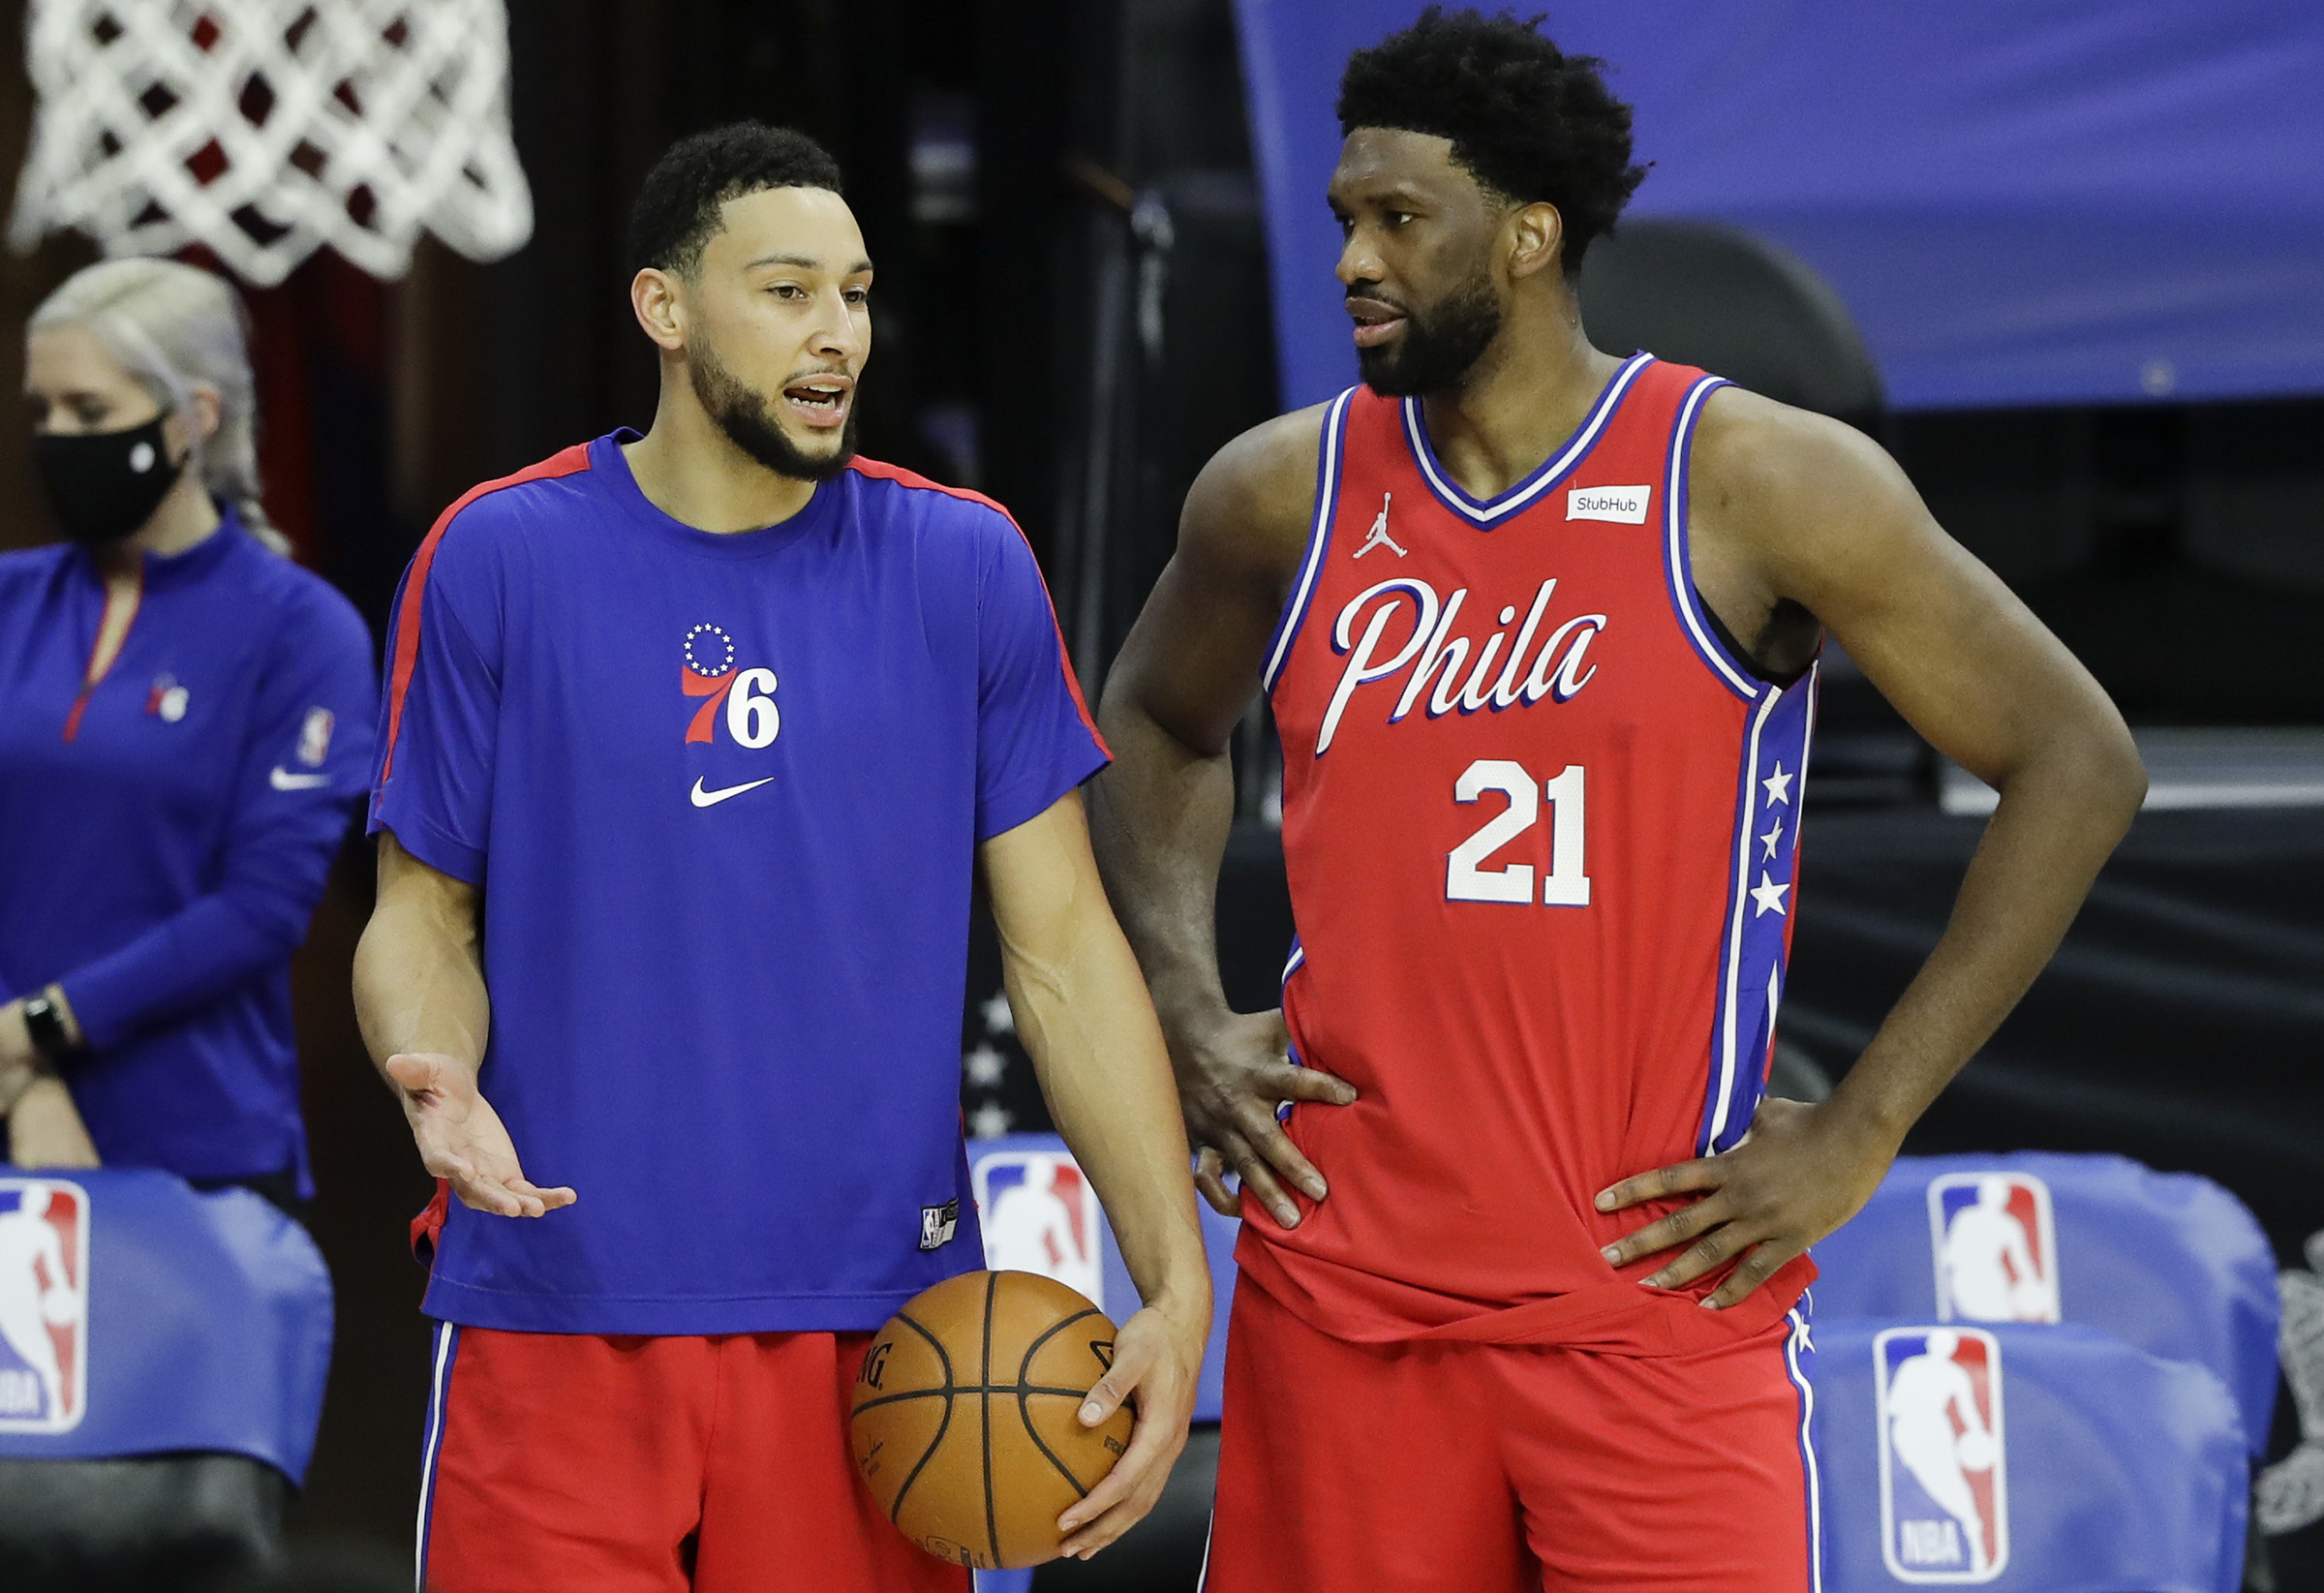 Ben Simmons and Joel Embiid's partnership continues to grow